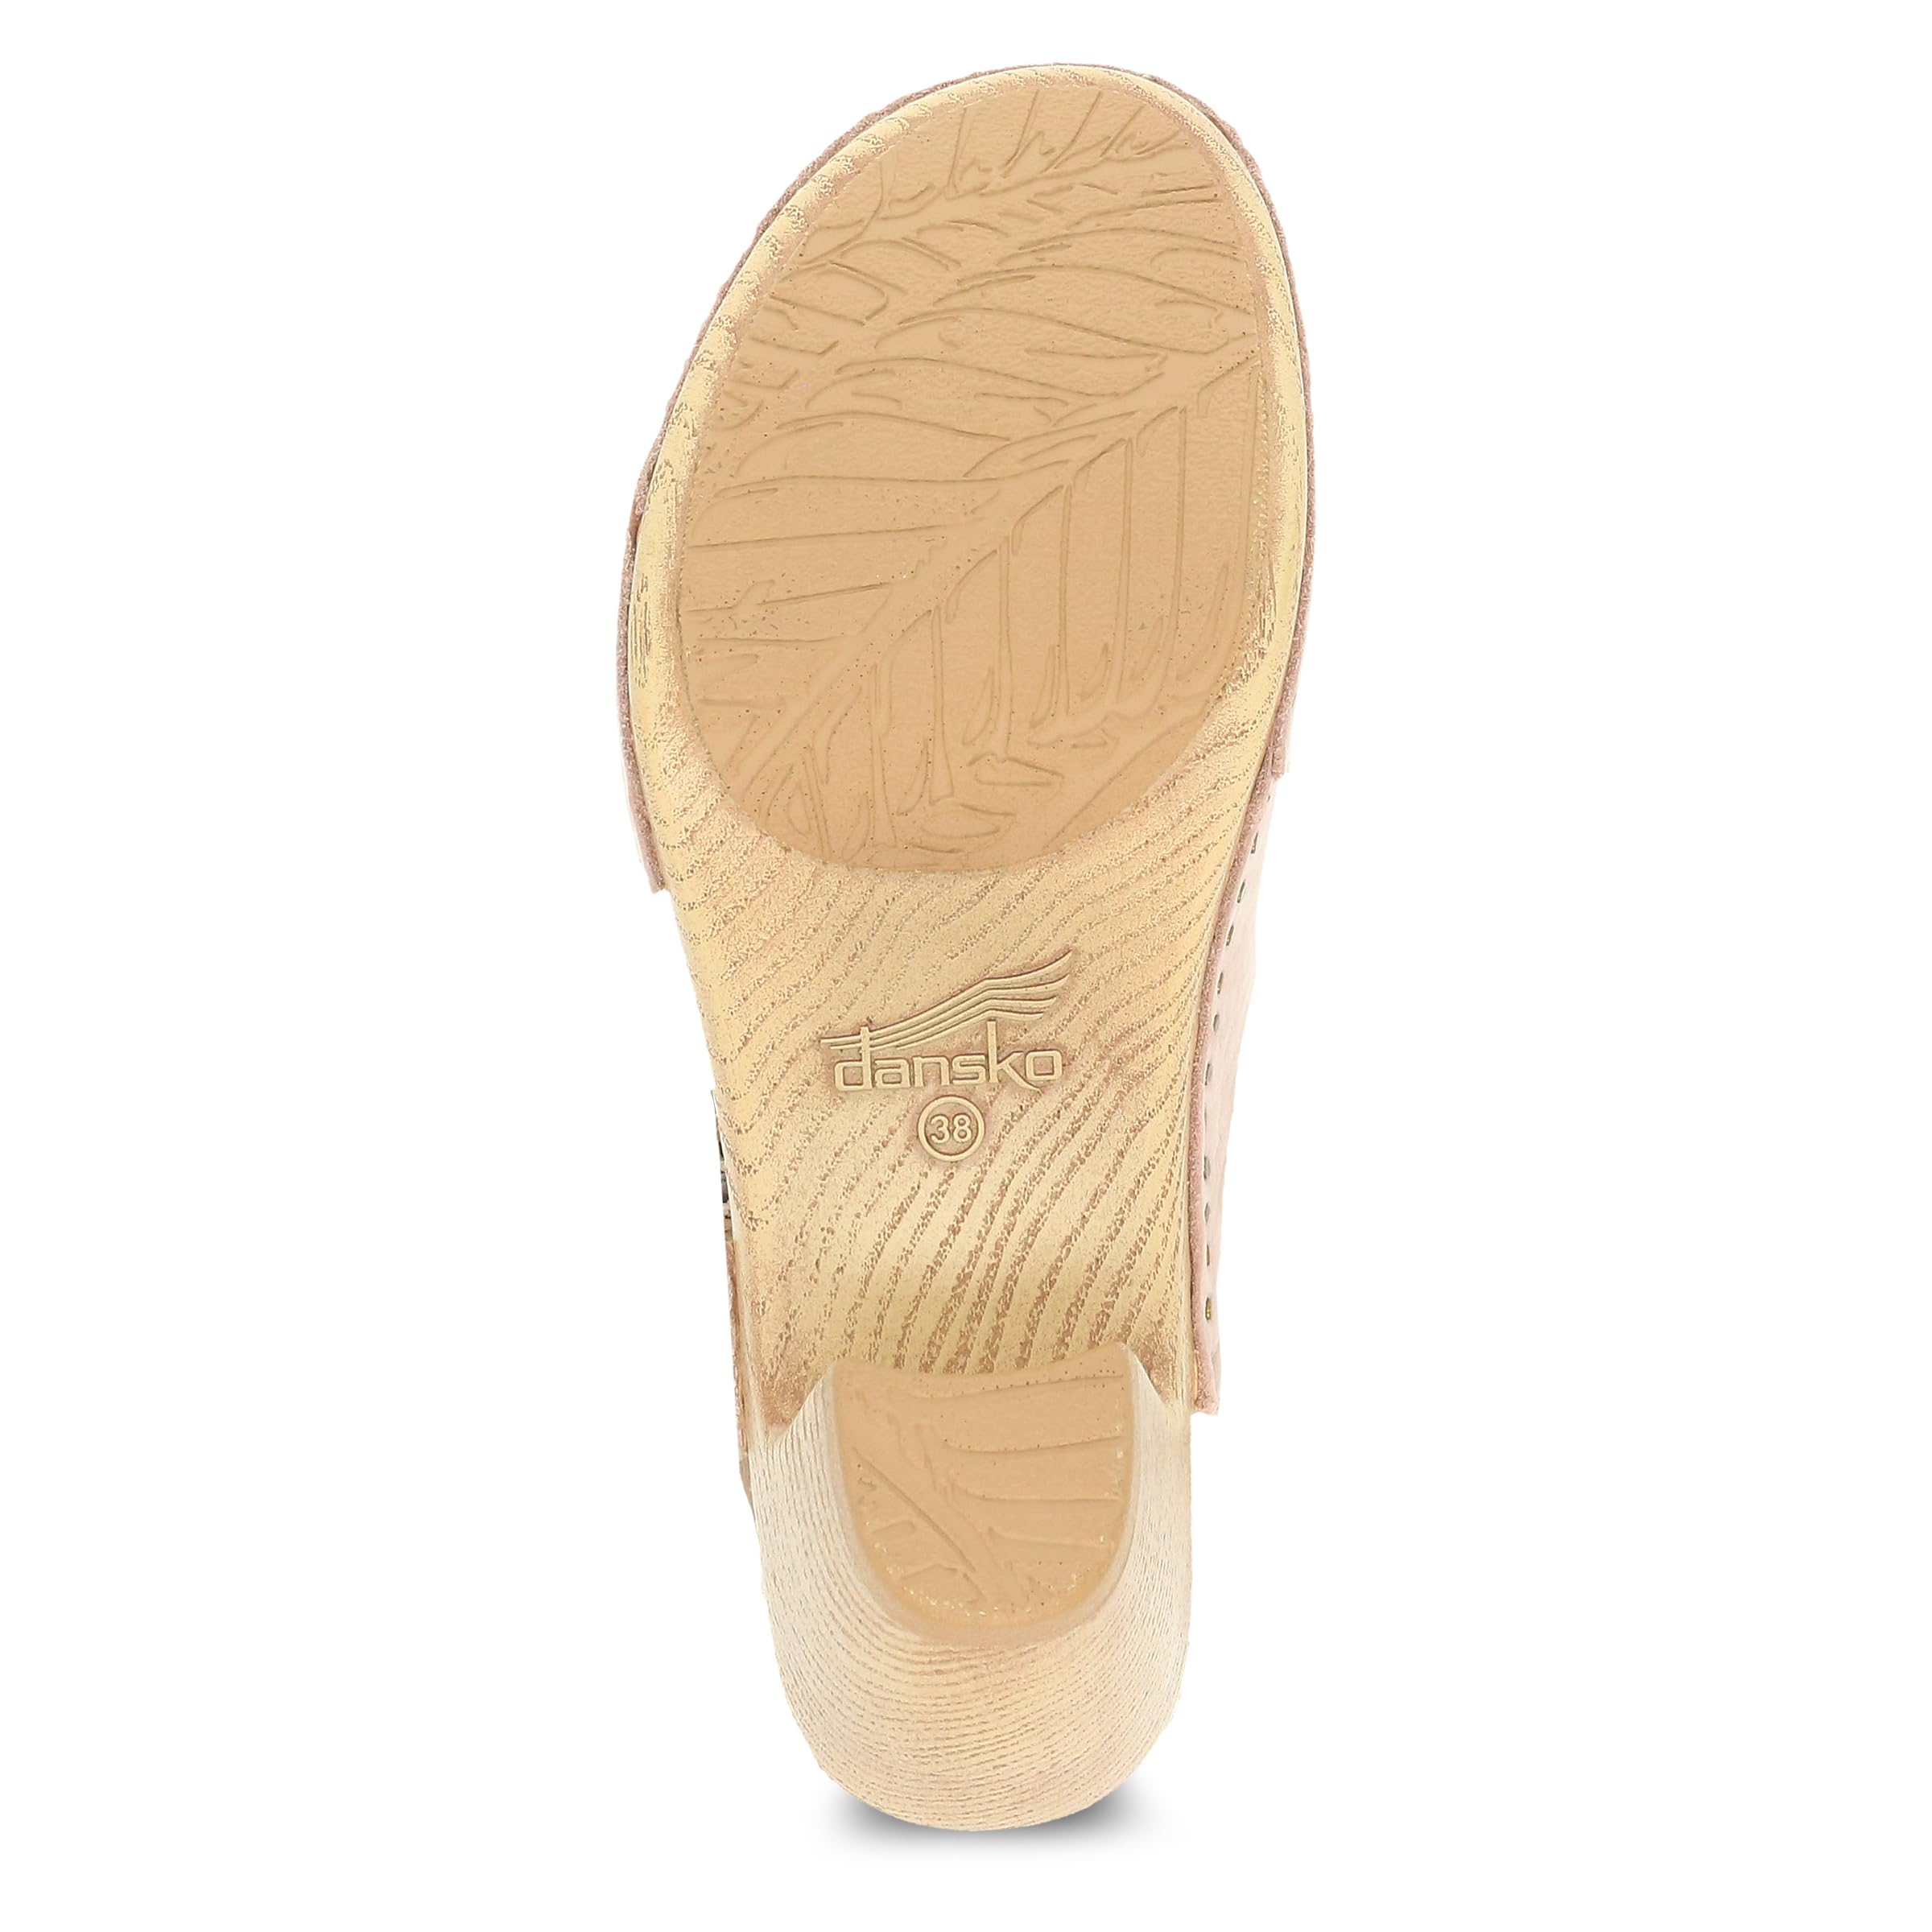 Dansko Taytum Closed-Toe Assymetrical Sandal for Women - Quality Leathers Treated with Scotchgard for Stain Resistance - Cushioned, Contoured Footbed for All-Day Comfort